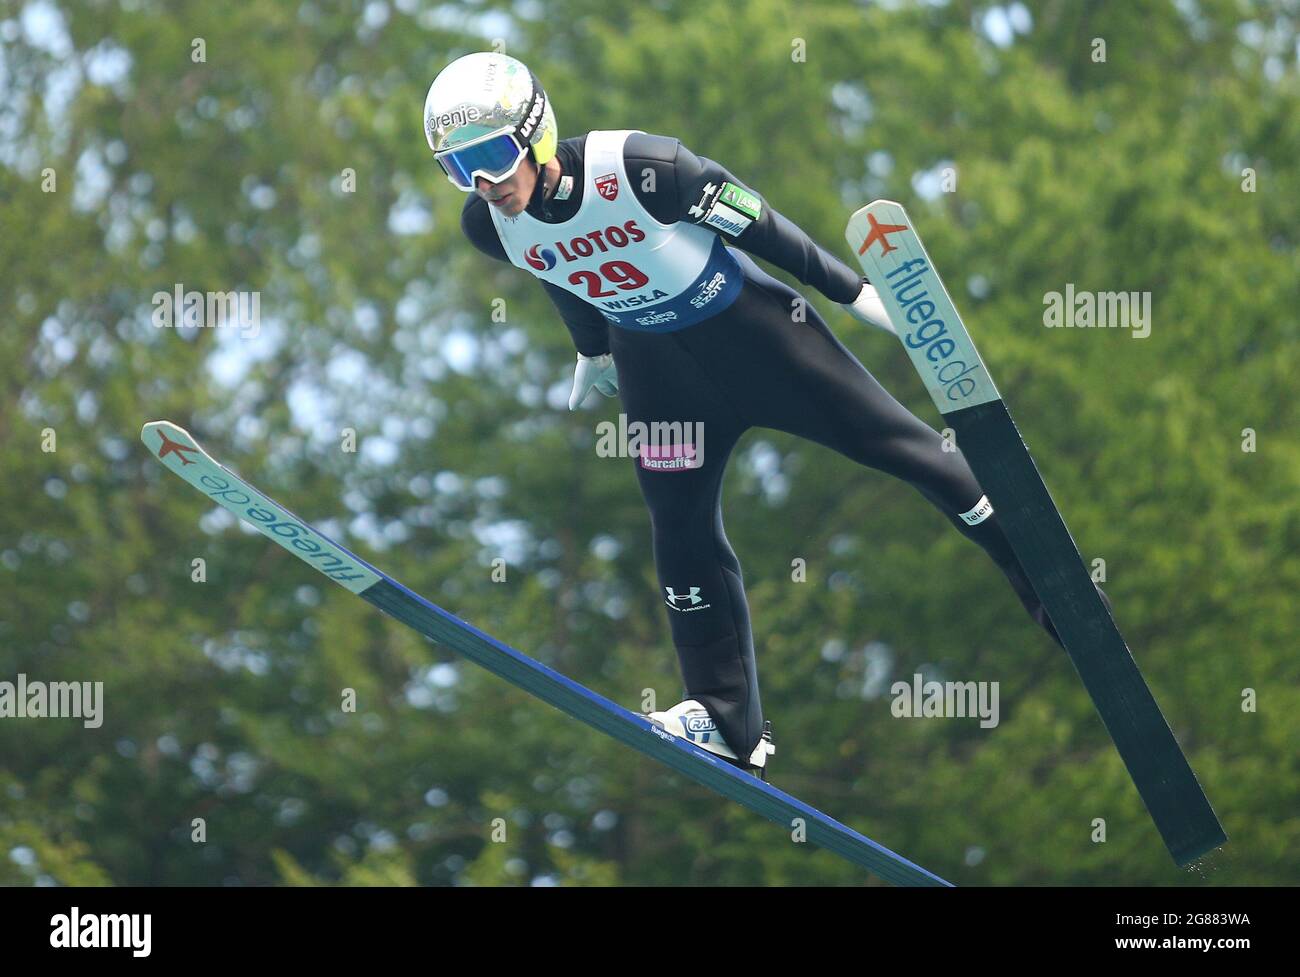 Wisla, Poland. 17th July, 2021. Timi Zajc in action during the individual  competition of the FIS Ski Jumping Summer Grand Prix in Wisla. Credit: SOPA  Images Limited/Alamy Live News Stock Photo -